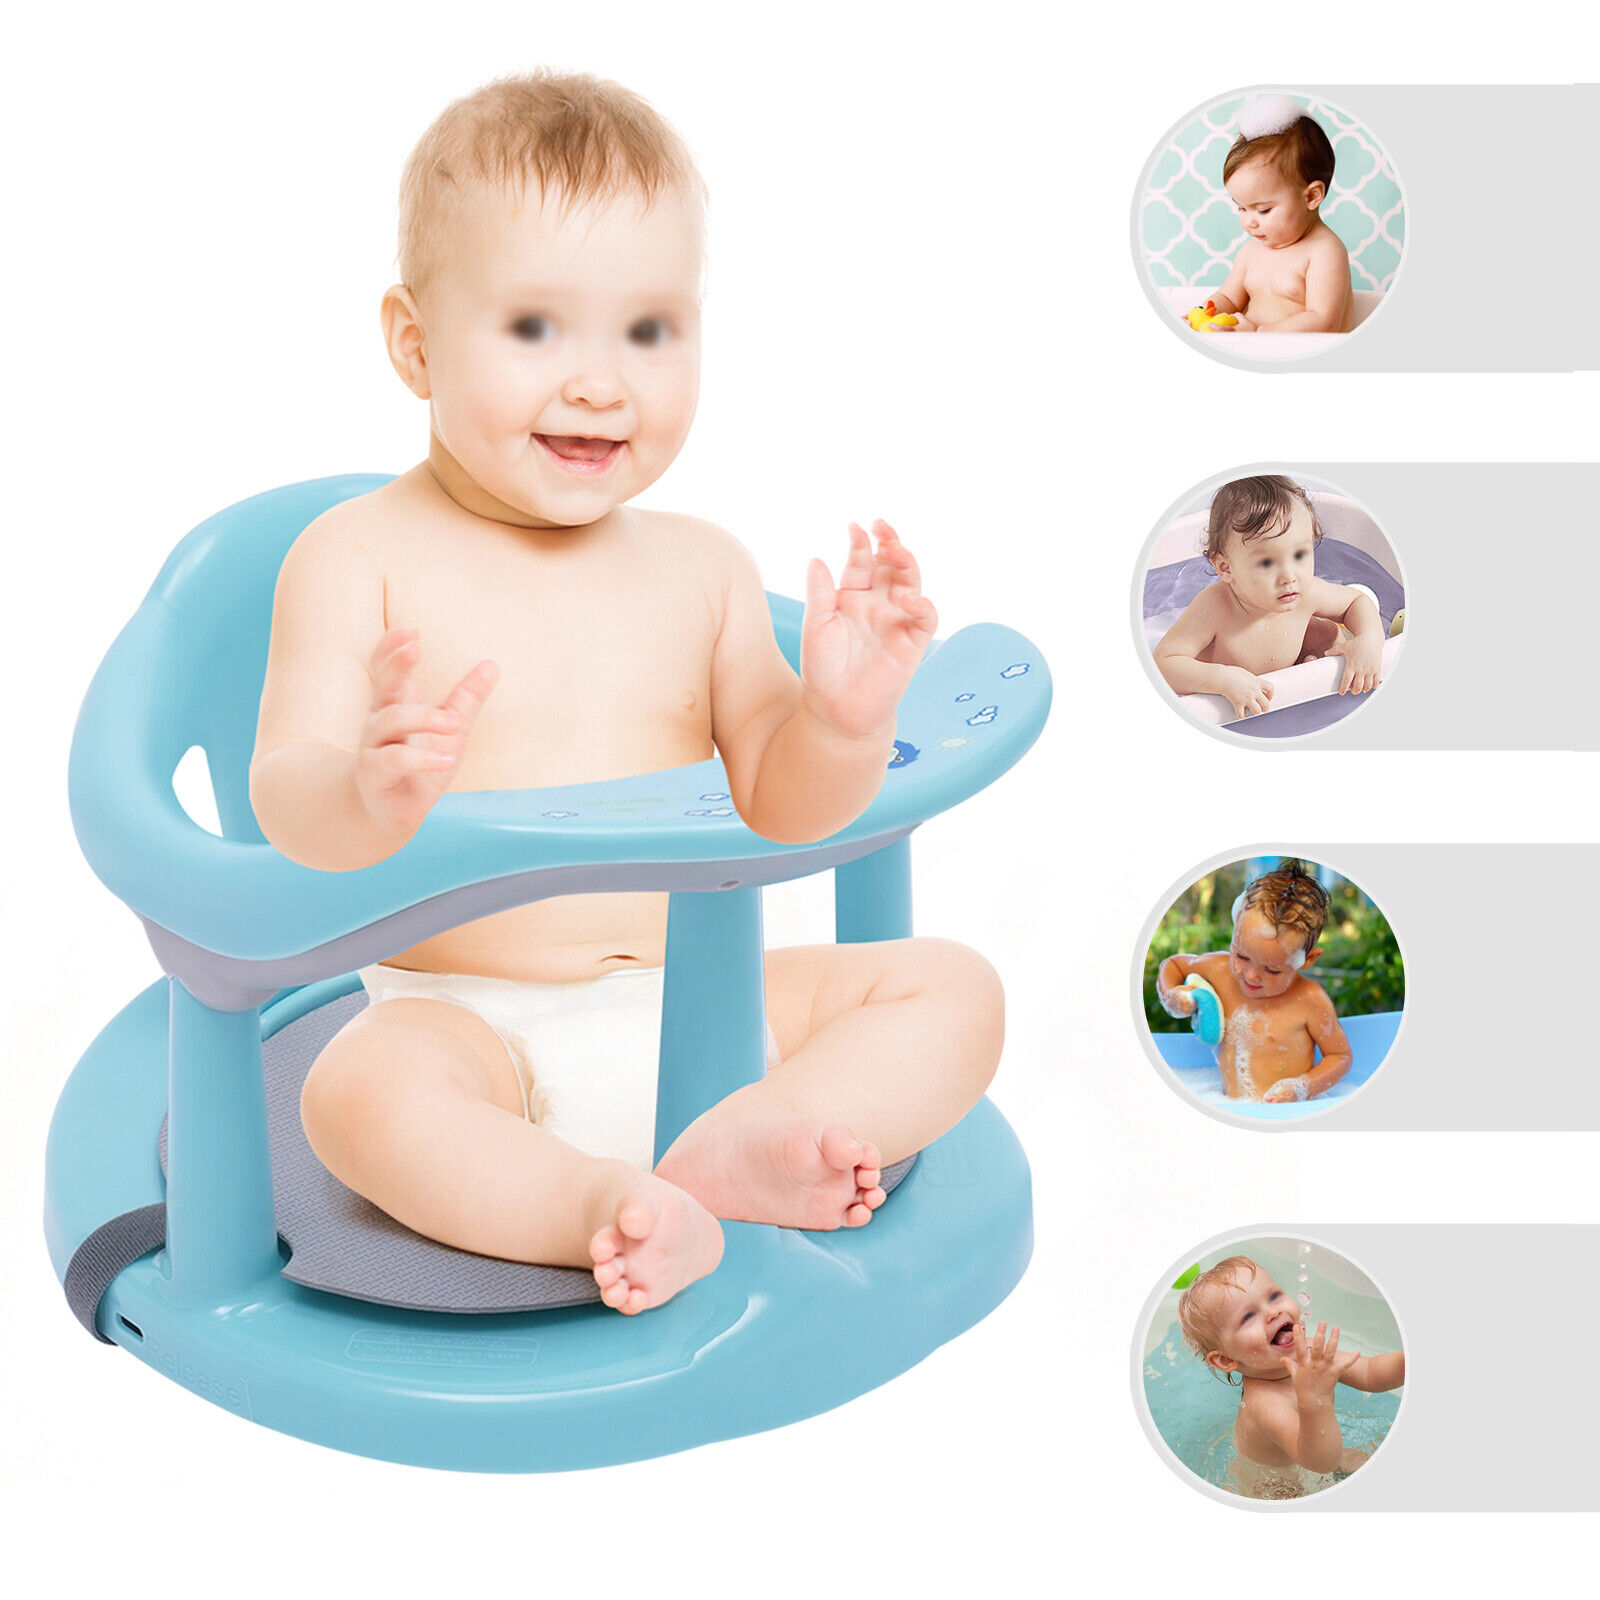 Rotho Bath Seat with Safety Lock